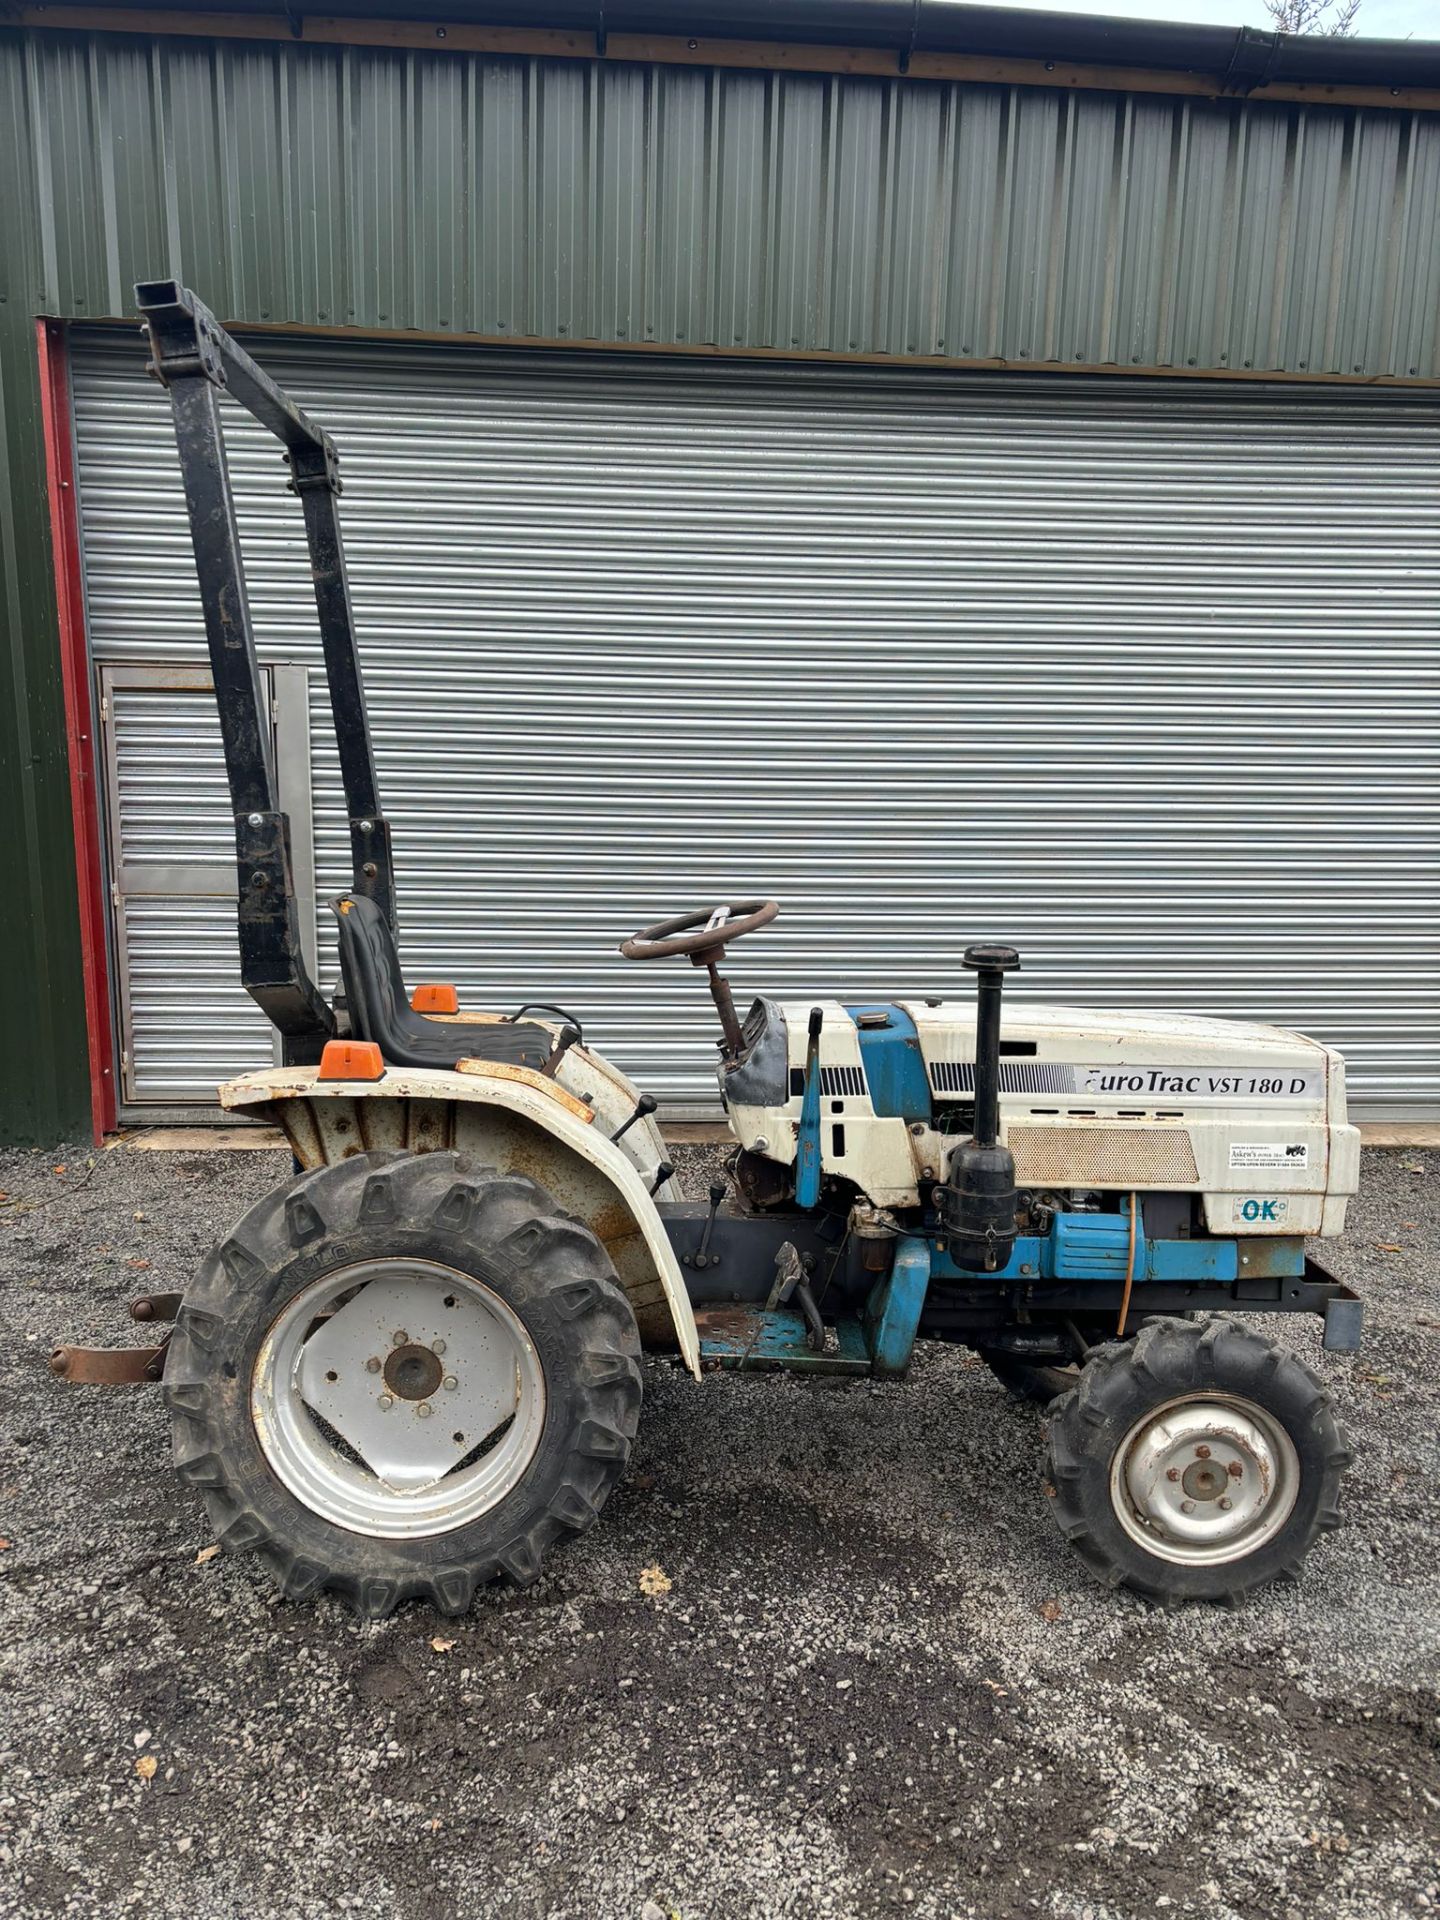 EUROTRAC MITSUBISHI VST 180 D COMPACT TRACTOR 4X4 4WD - Image 13 of 13